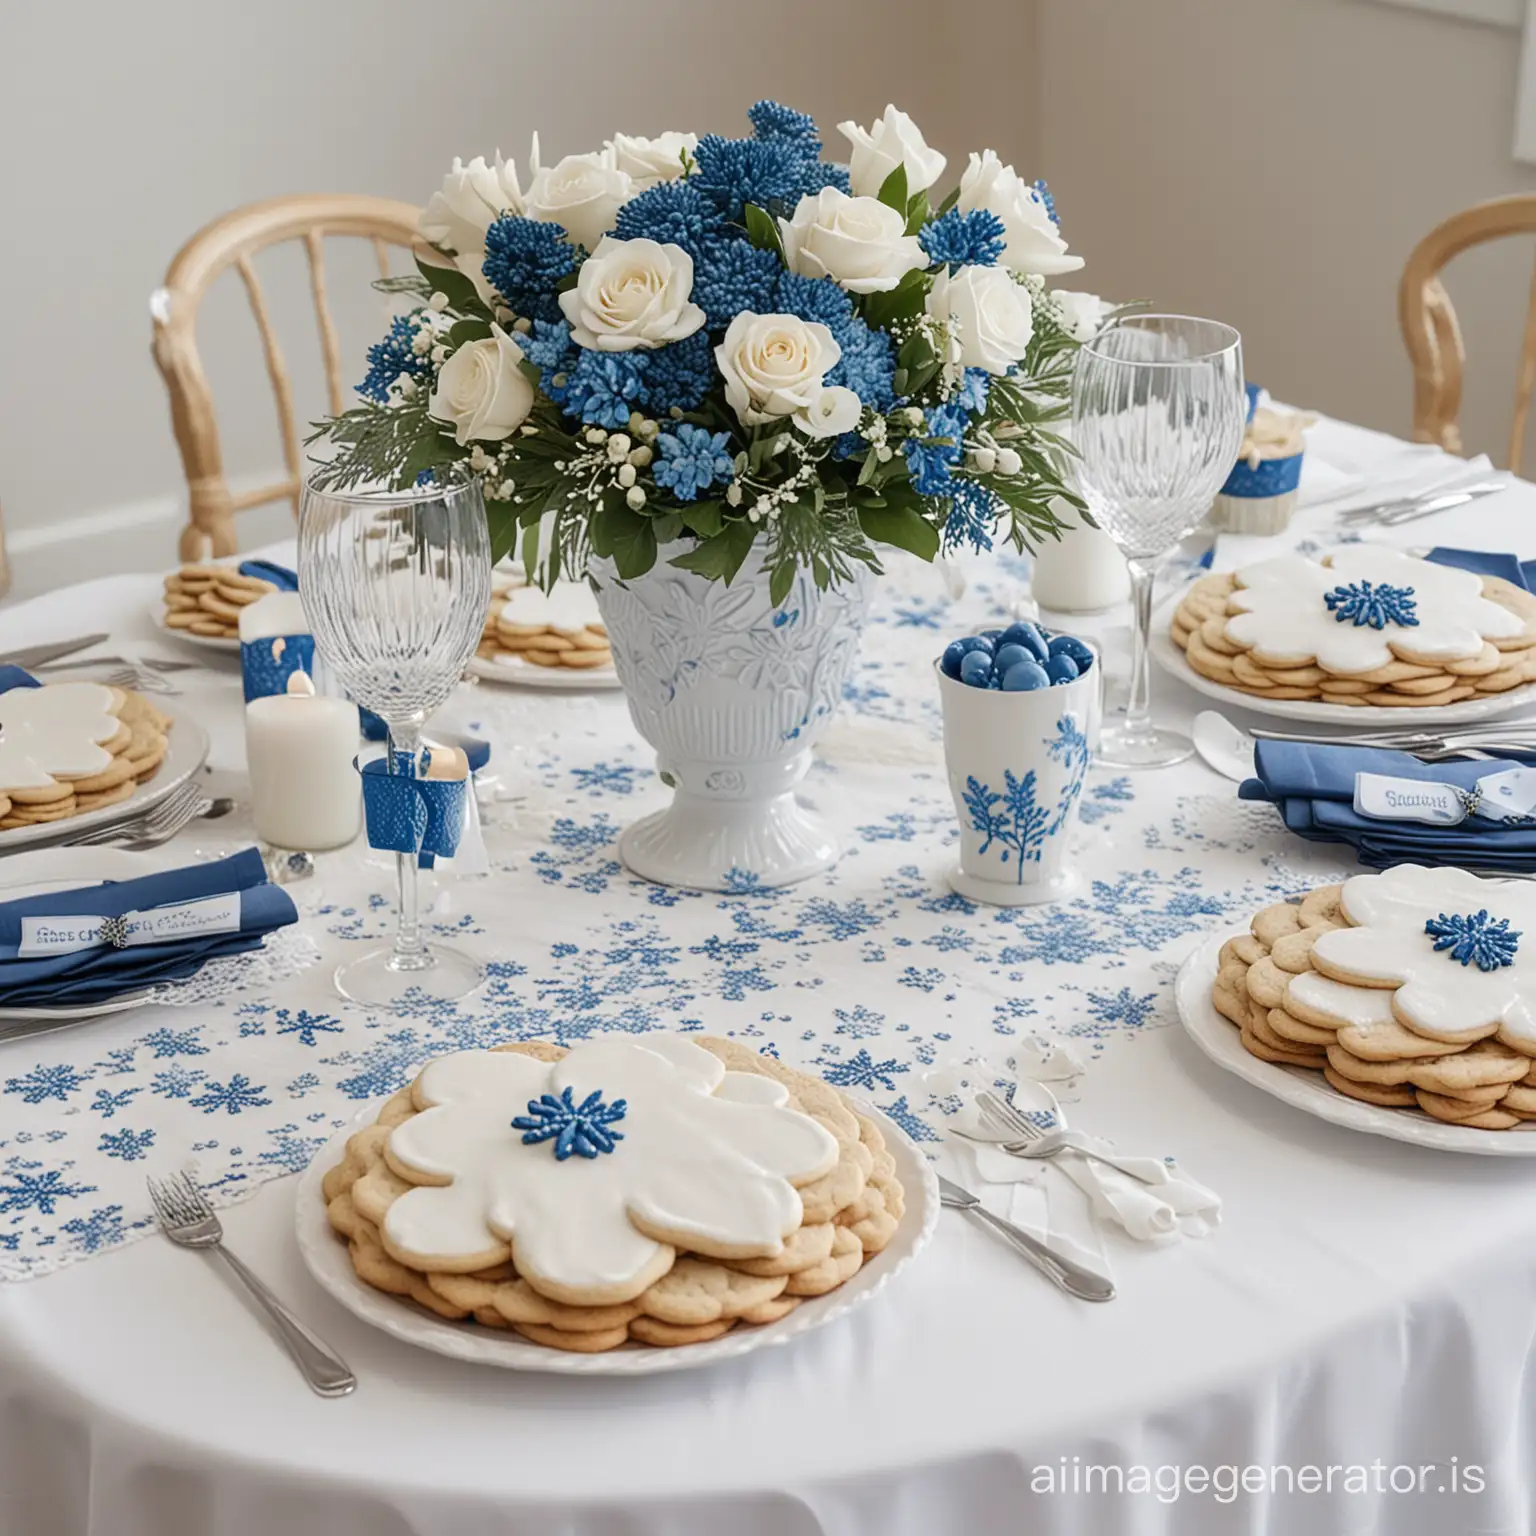 a wedding table with white tablecloth and blue accents with a winter centerpiece theme of sugar cookies with white frosting and blue accents